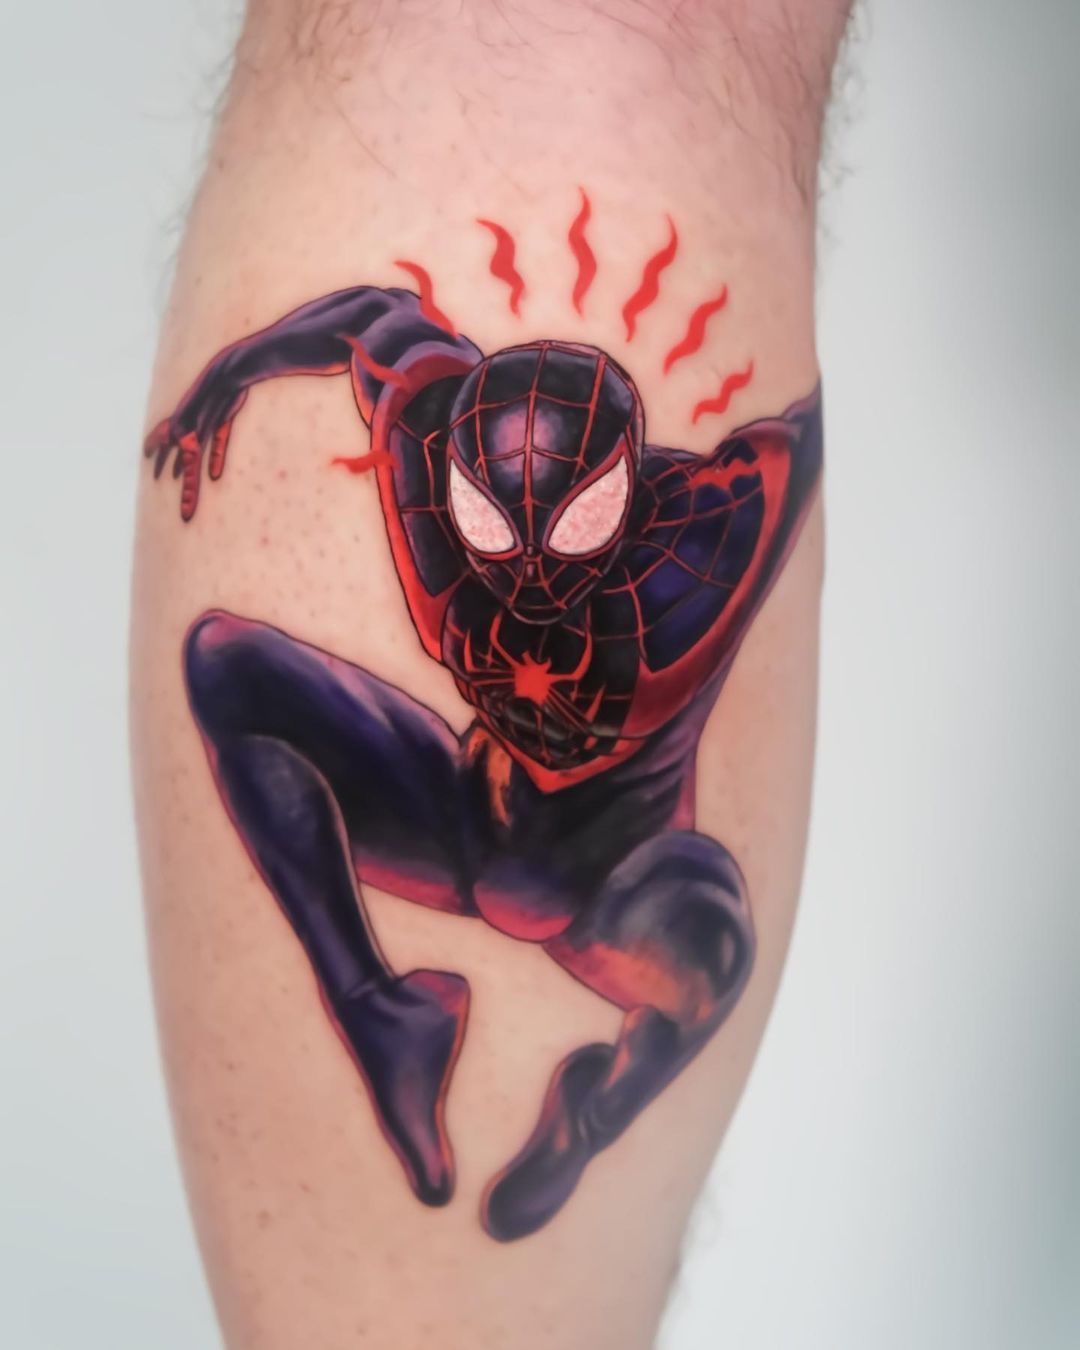 Gerson Josue |Tattoo Artist | Miles morales Spiderman tattoo Currently  taking appointments for June , July and August please dm me or Email me to  book your appointmen... | Instagram